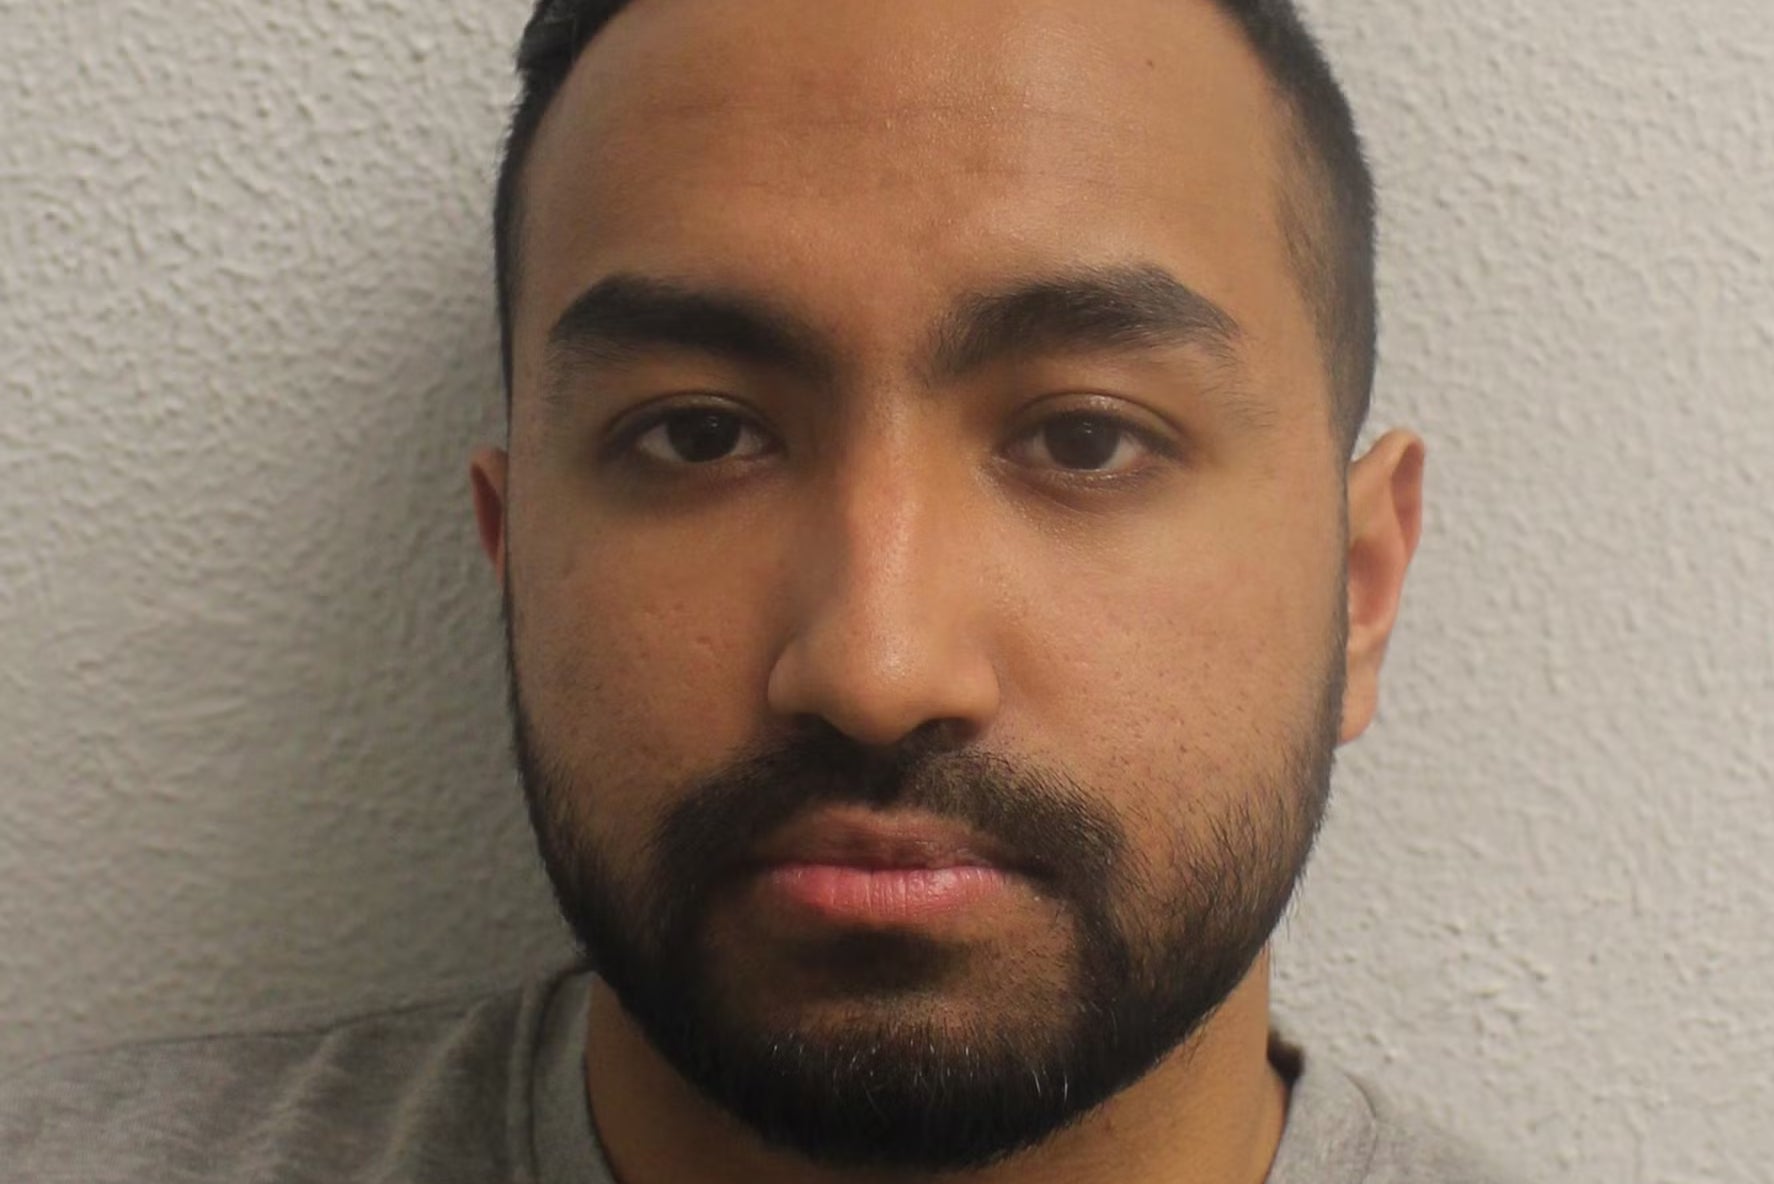 Mohammed Amin was sentenced to two years and ten months in prison at the Old Bailey